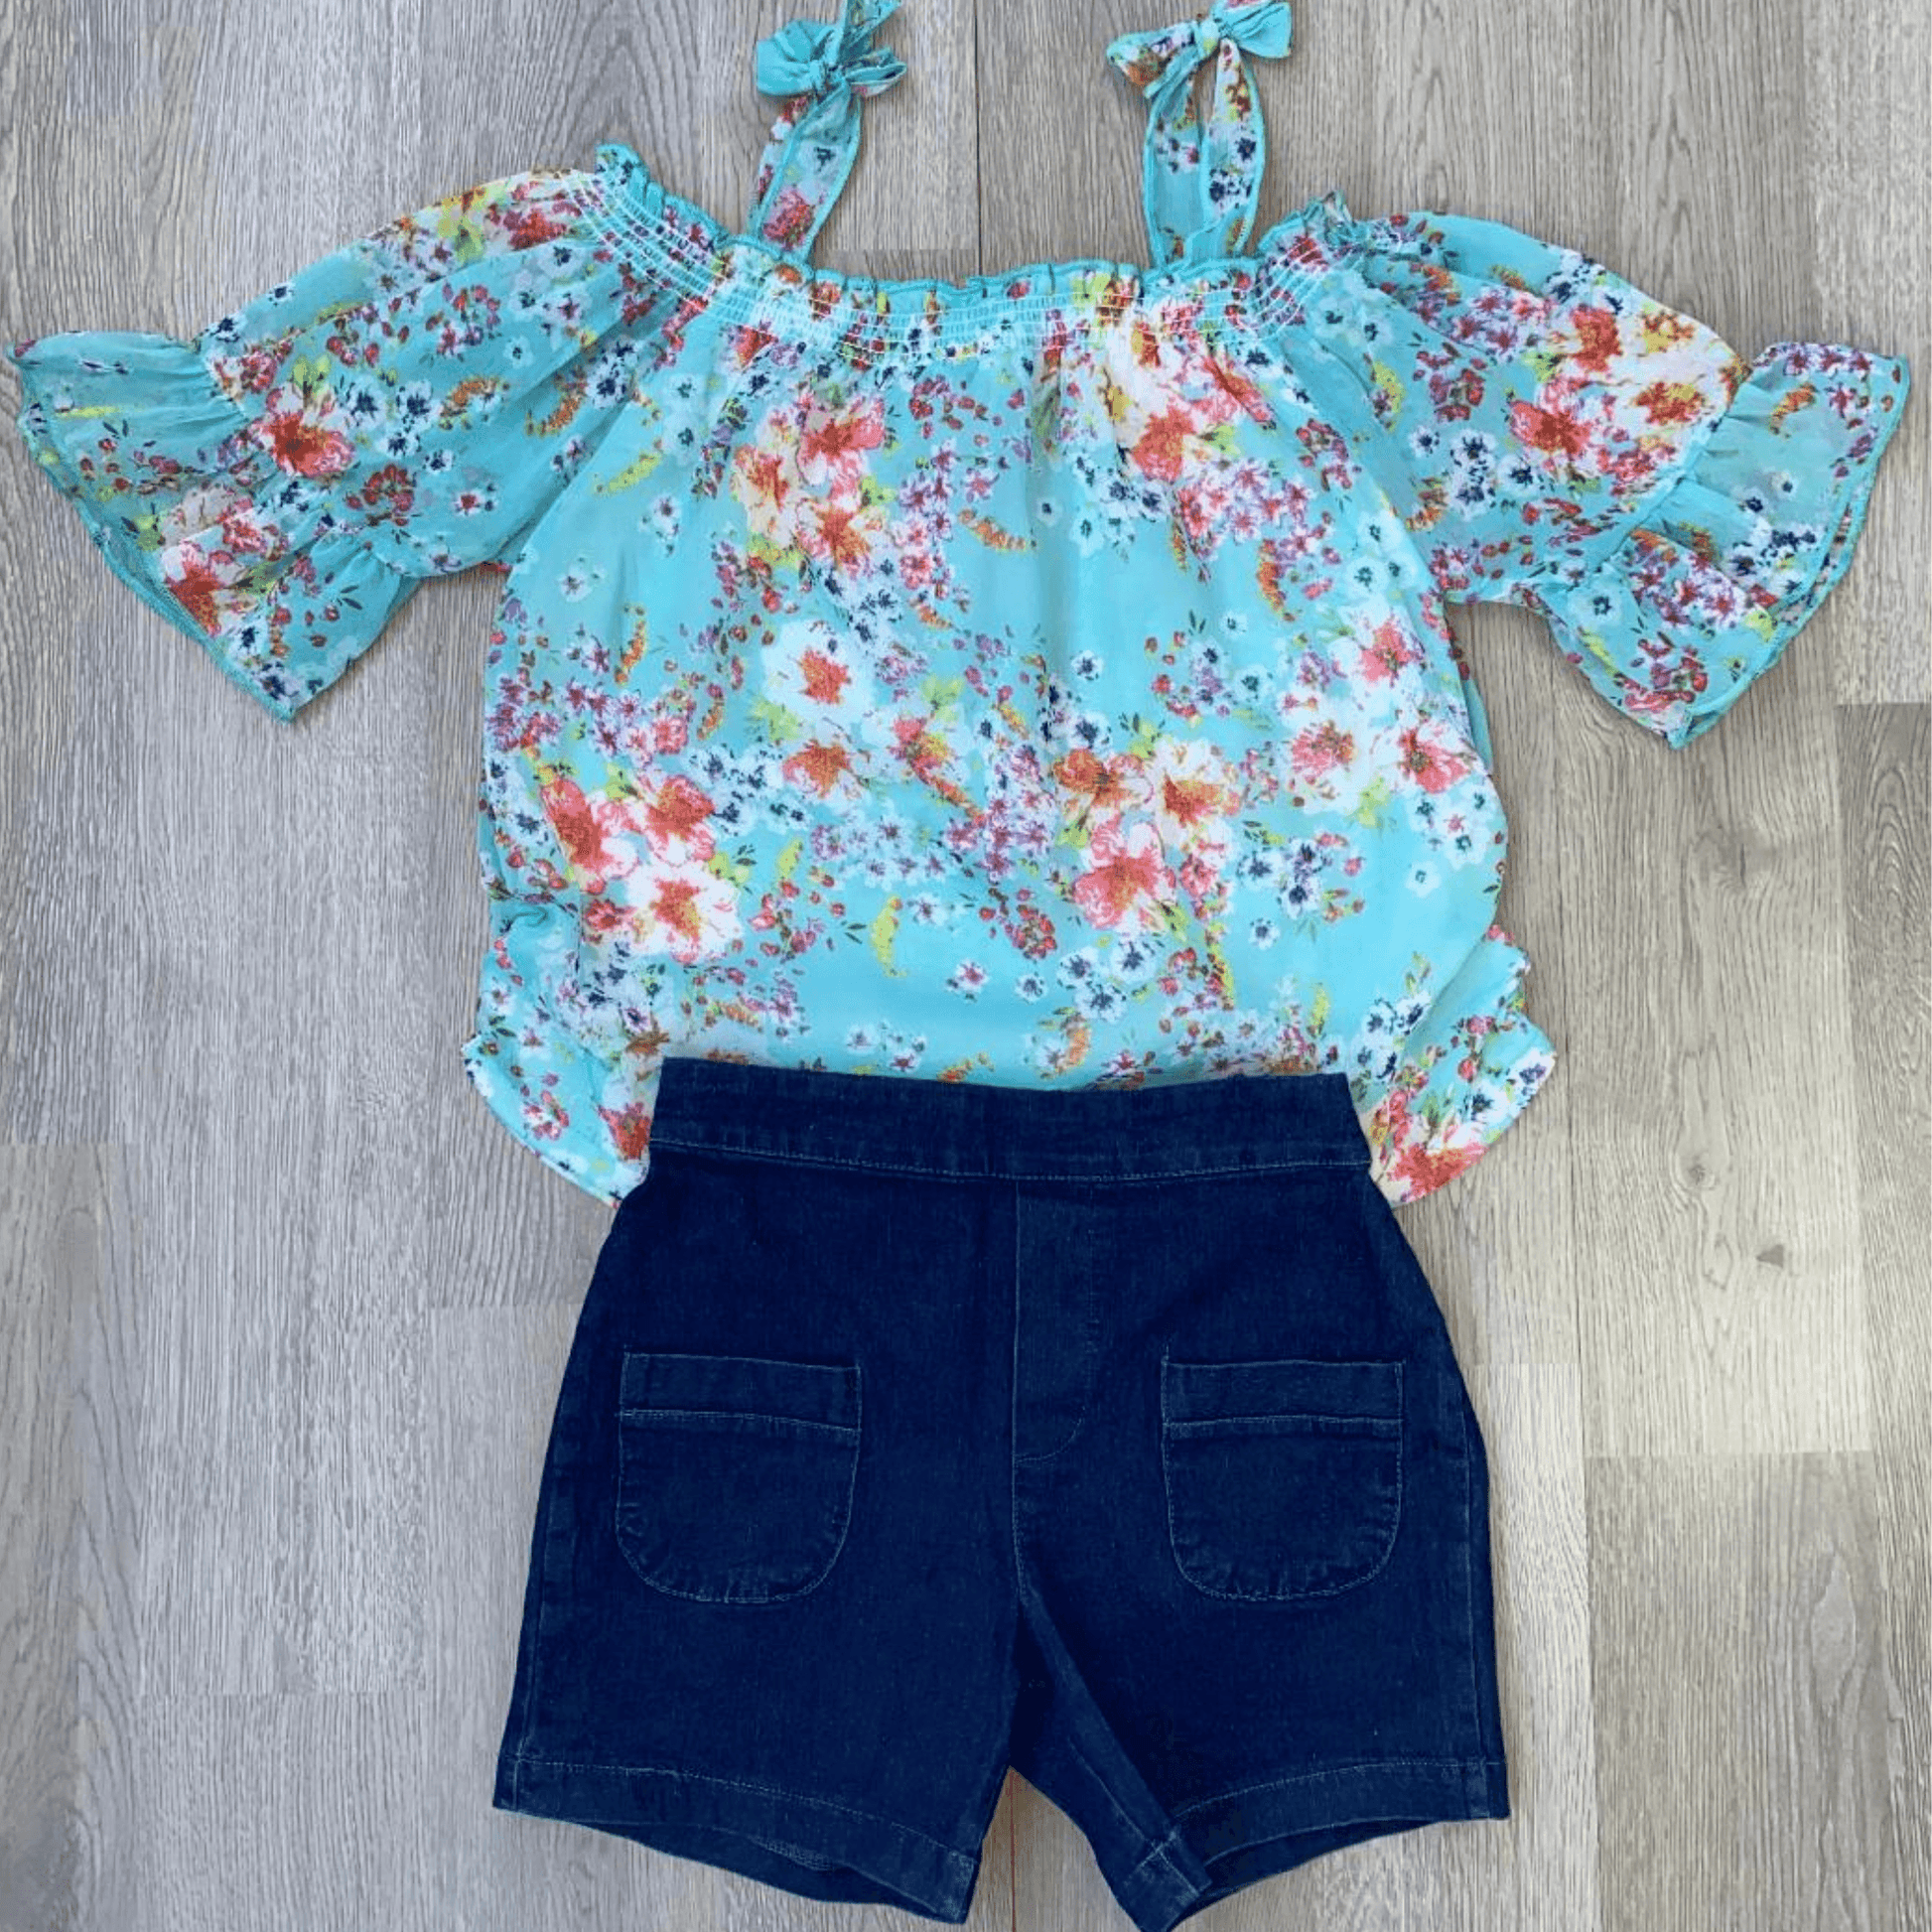 Be summer ready with this cute 2 piece short set featuring an off the shoulder, light weight blouse.  The blouse is mint colored with tie up straps and a floral print.  The shorts are denim colored with an elastic waist and two front pockets.